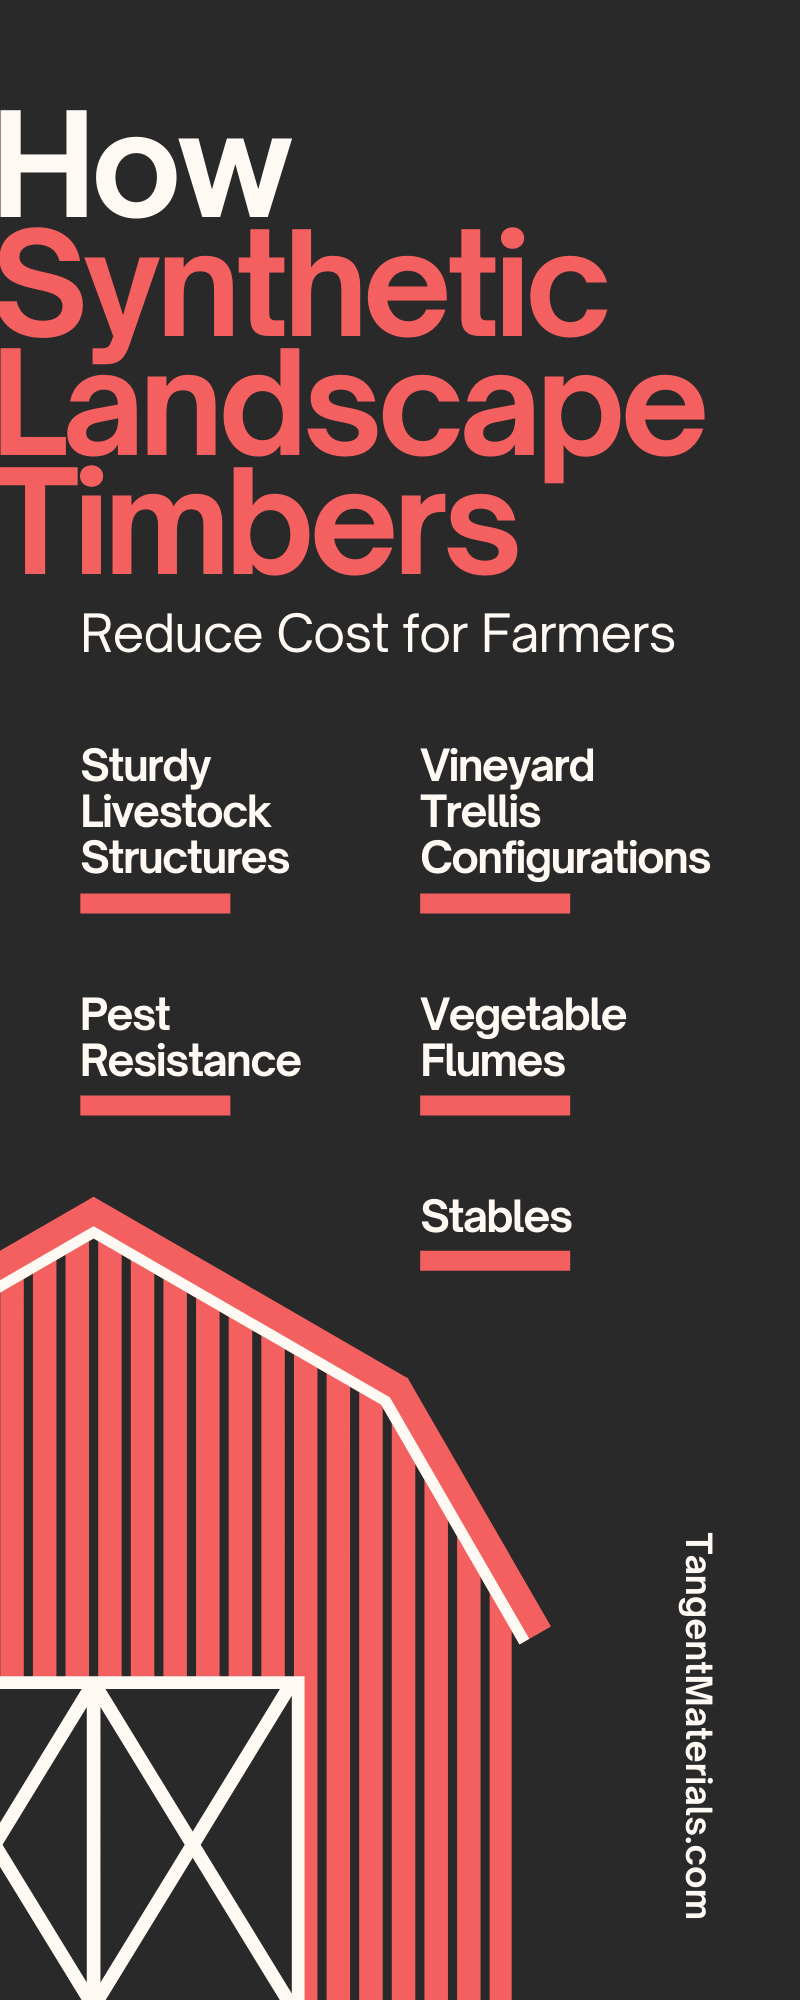 How Synthetic Landscape Timbers Reduce Cost for Farmers